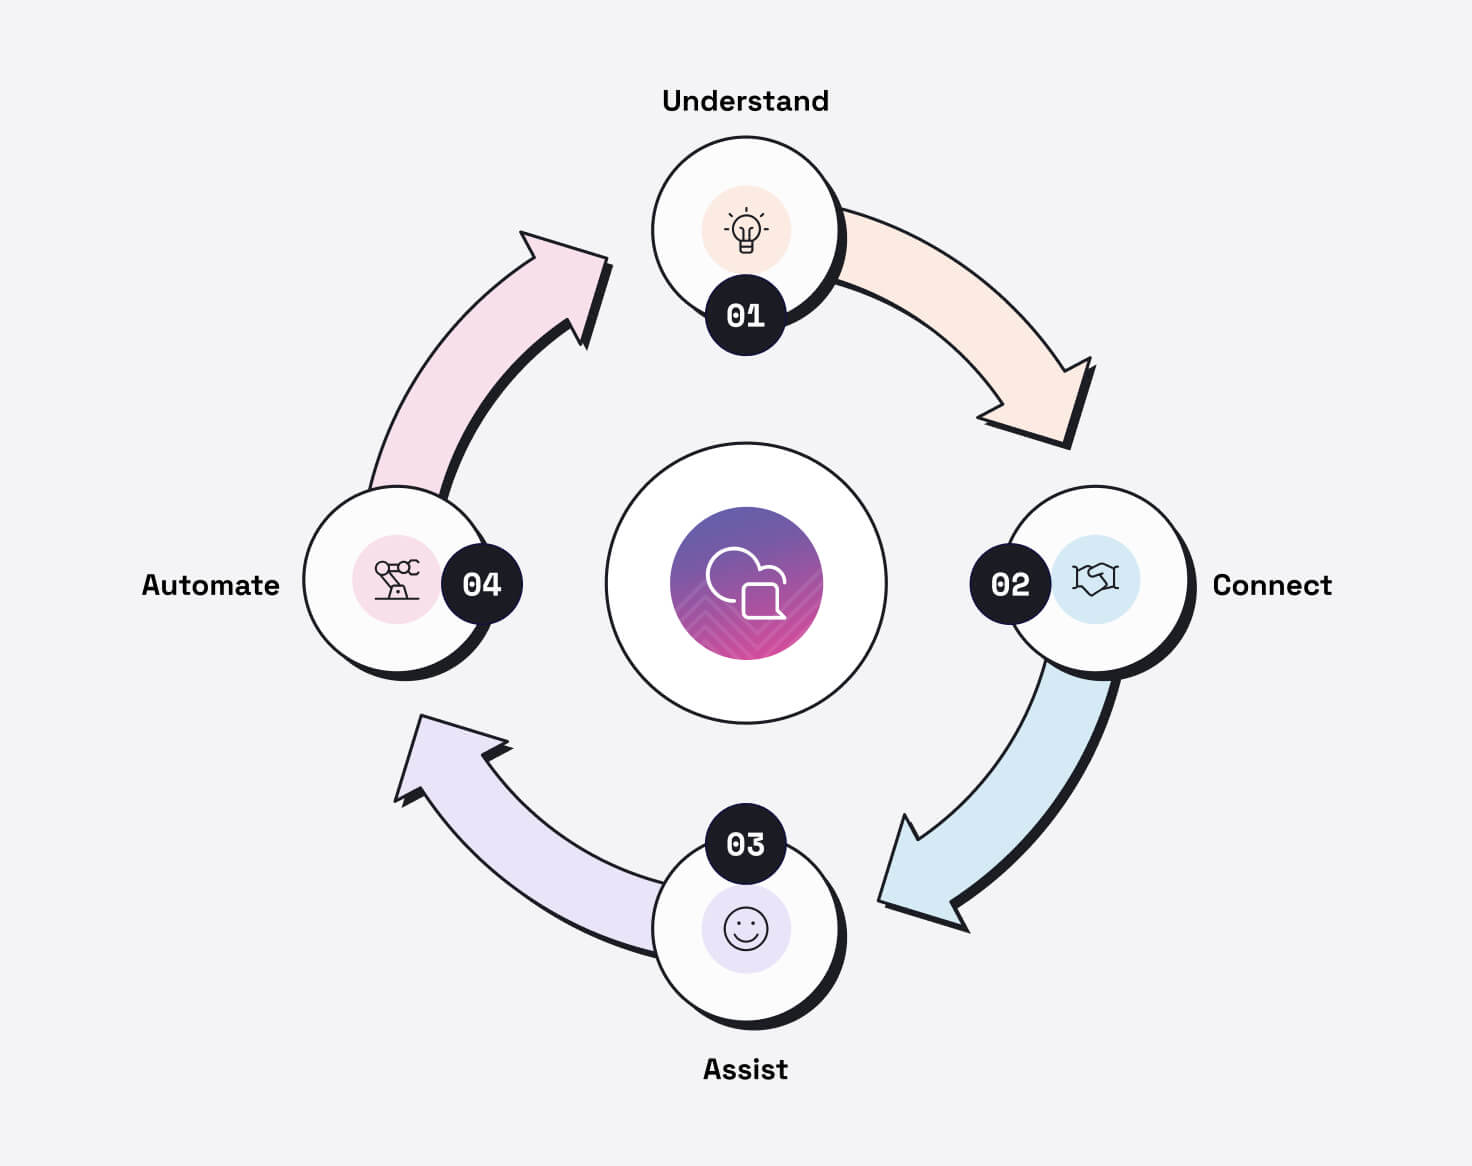 core features of the conversational AI platform flywheel, including Understand, Connect, Assist, and Automate